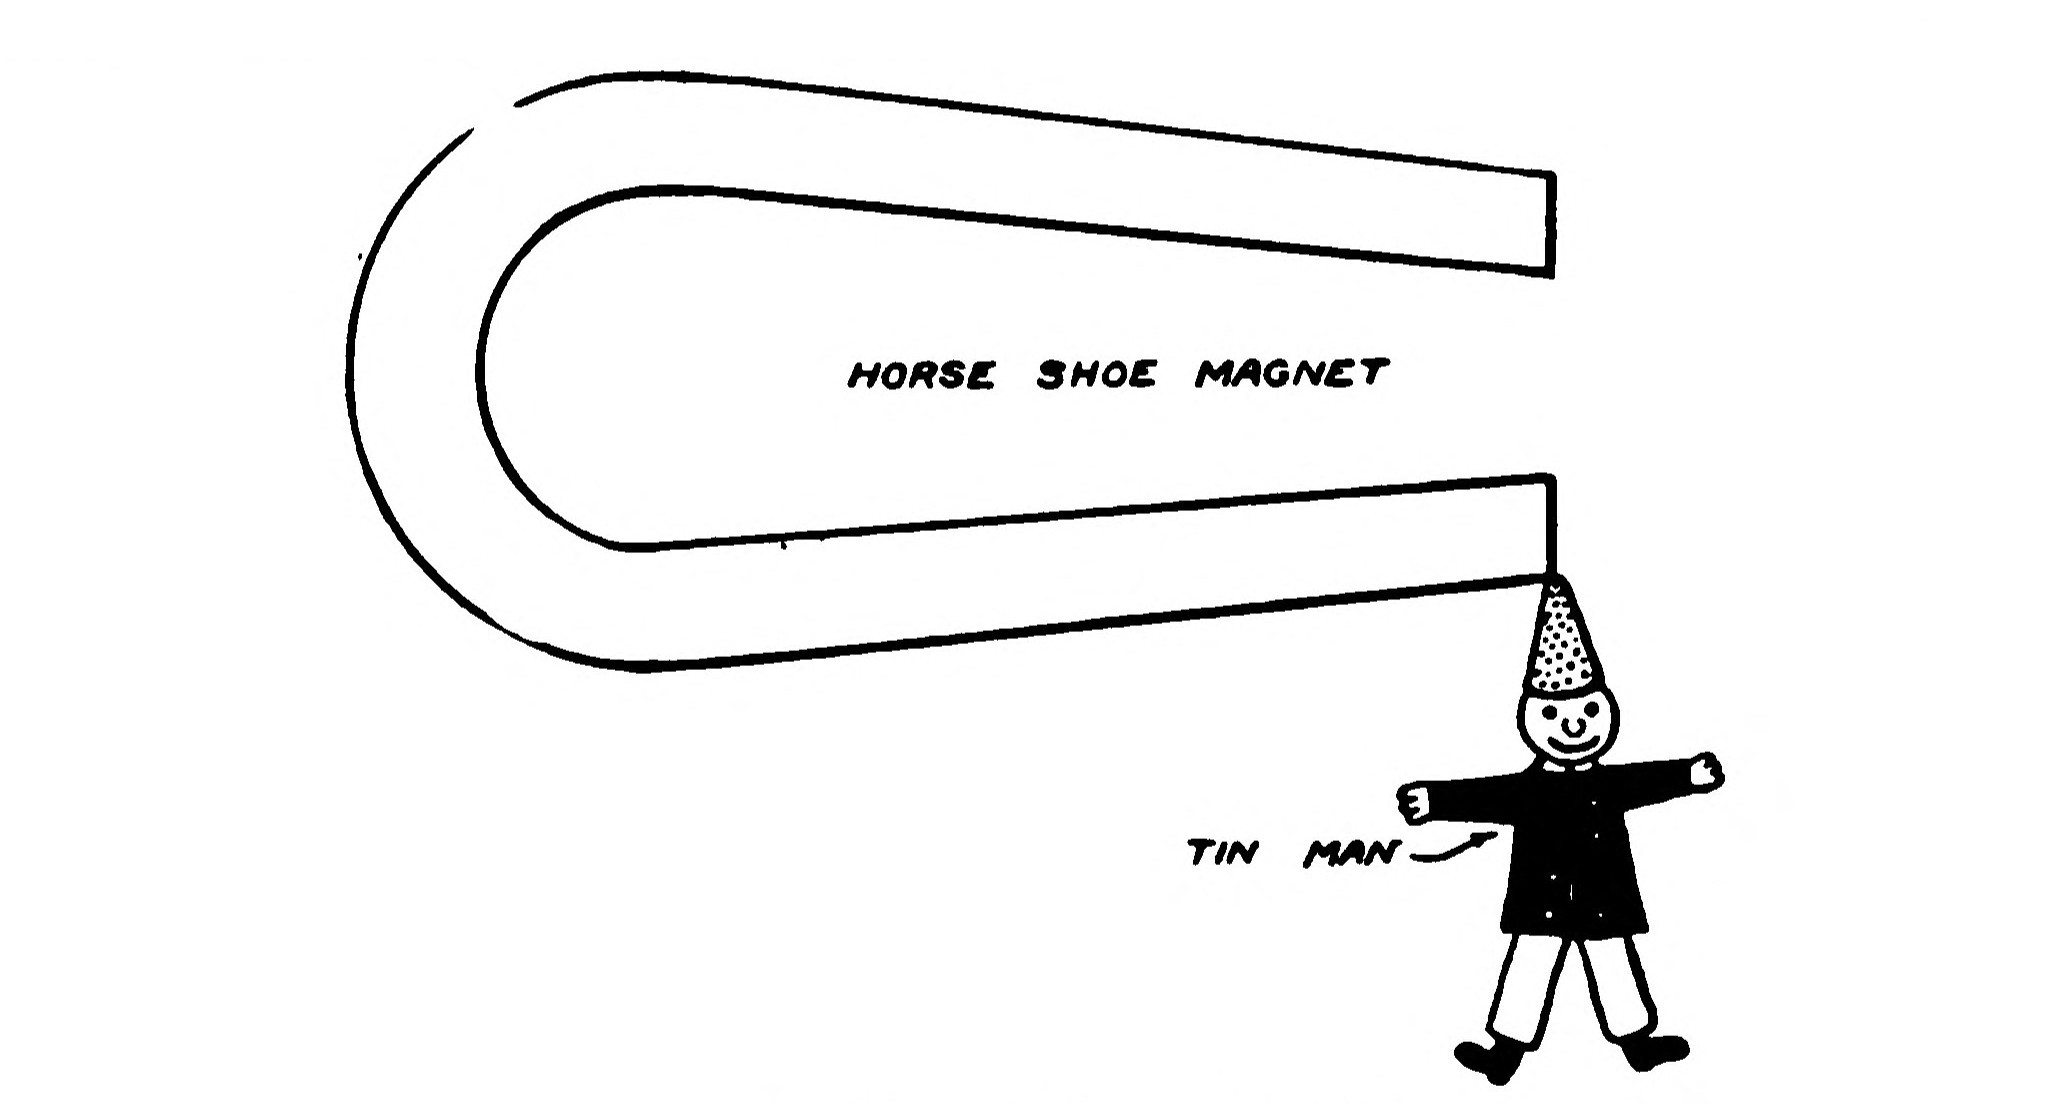 FIG. 192.—The Magnetic Clown.